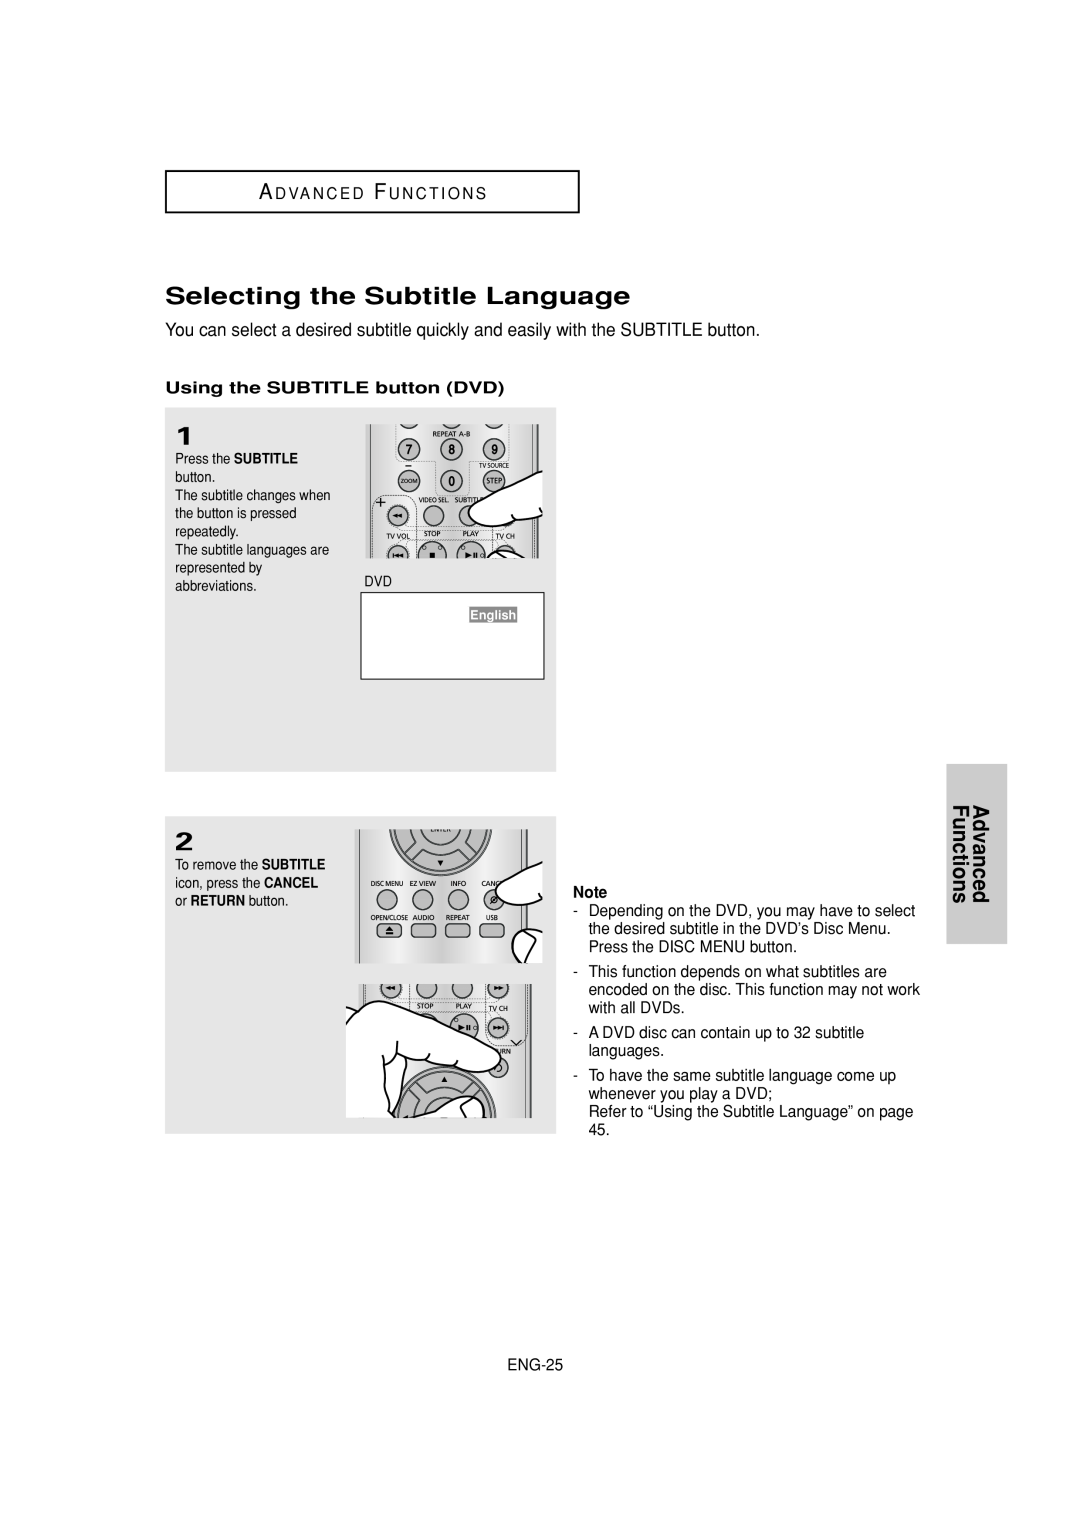 Samsung DVD-P181 manual Selecting the Subtitle Language, Using the SUBTITLE button DVD, Advanced Functions 